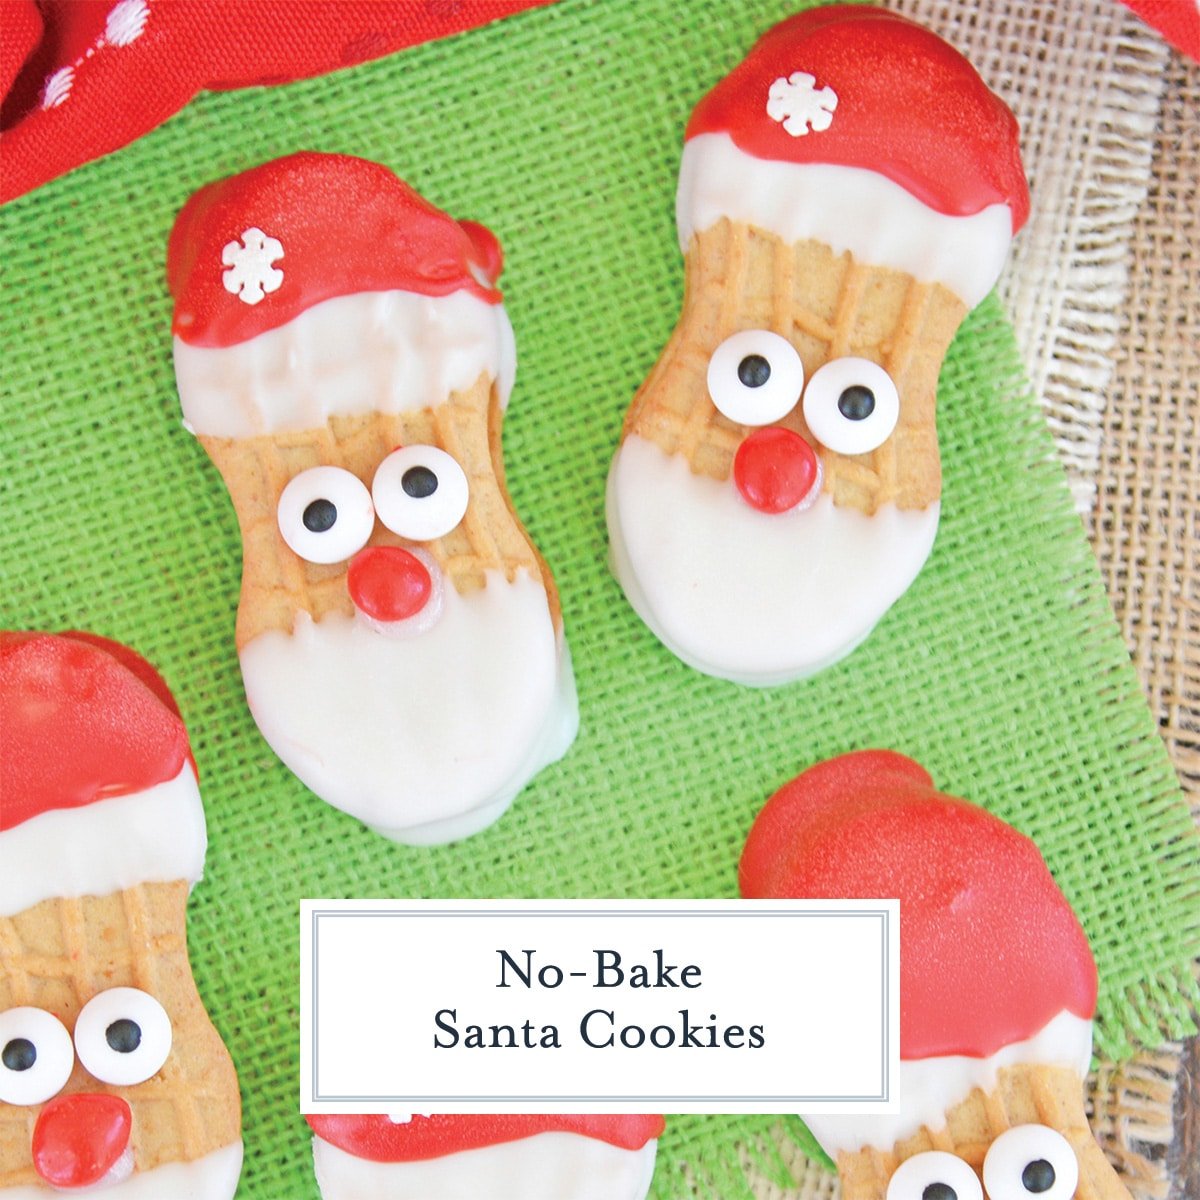 santa cookies with text overlay